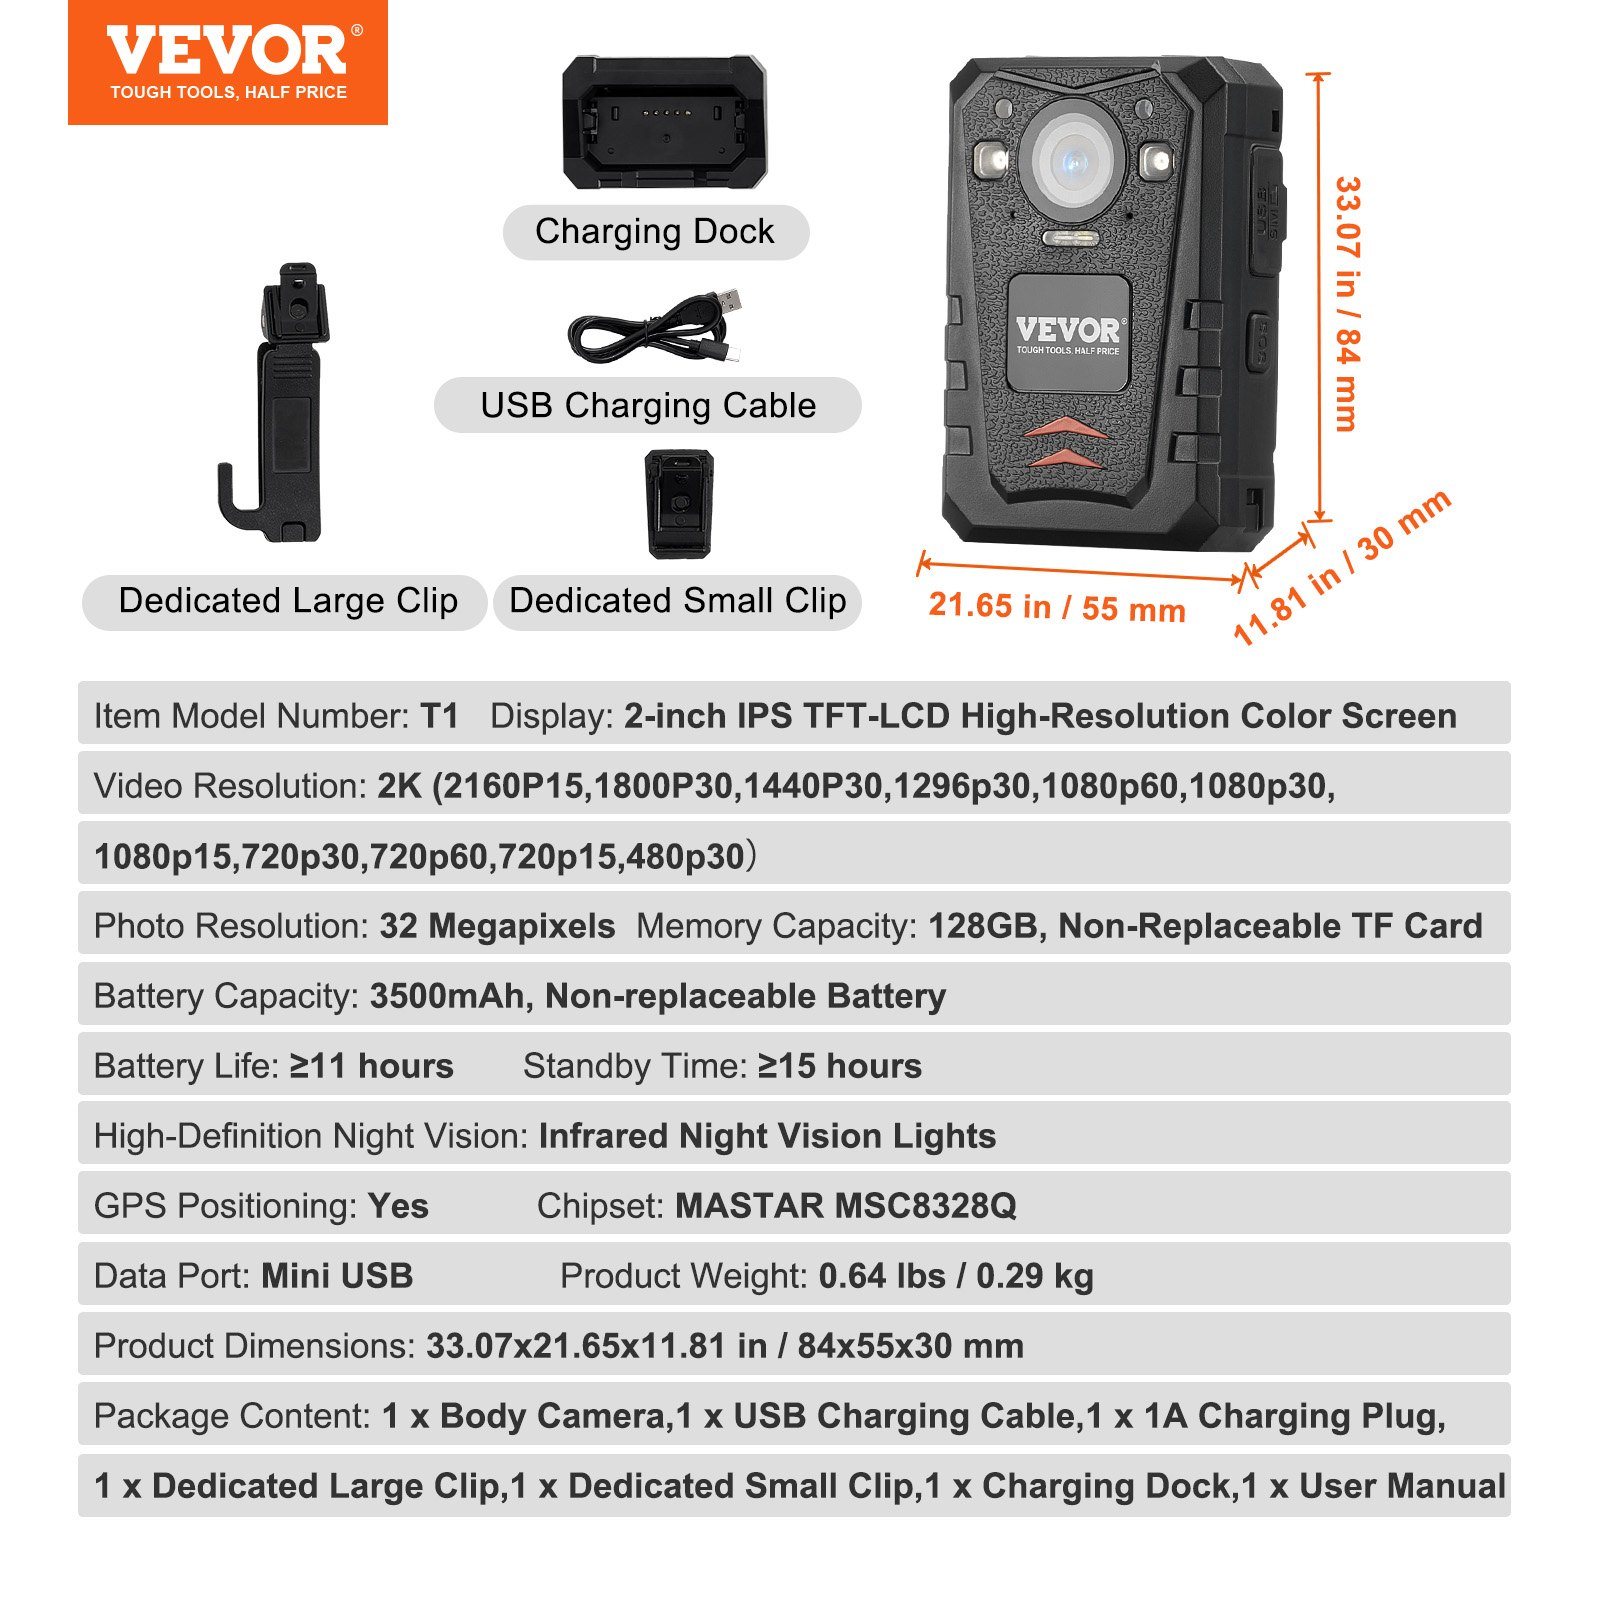 VEVOR 1440P HD Police Body Camera, 128GB Body Cam with Audio Video Recording Picture, Built-in 3500 mAh Battery, 2.0" LCD, Infrared Night Vision, Waterproof GPS Personal Body Cam for Law Enforcement, Goodies N Stuff